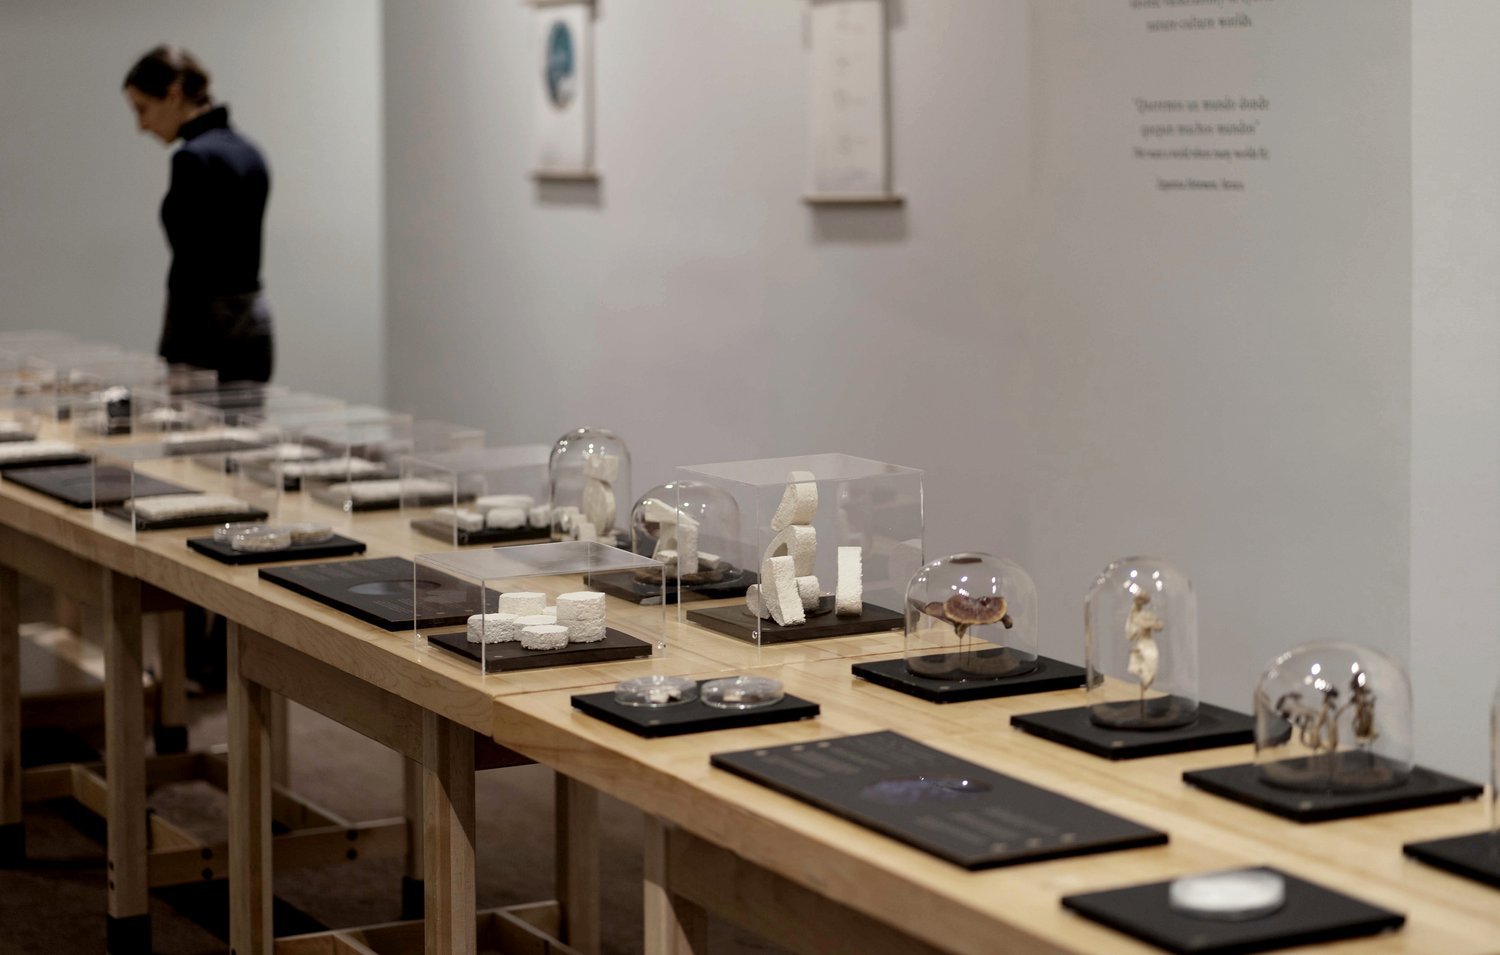 Included among the exhibitions are beautiful objects made with mycelium